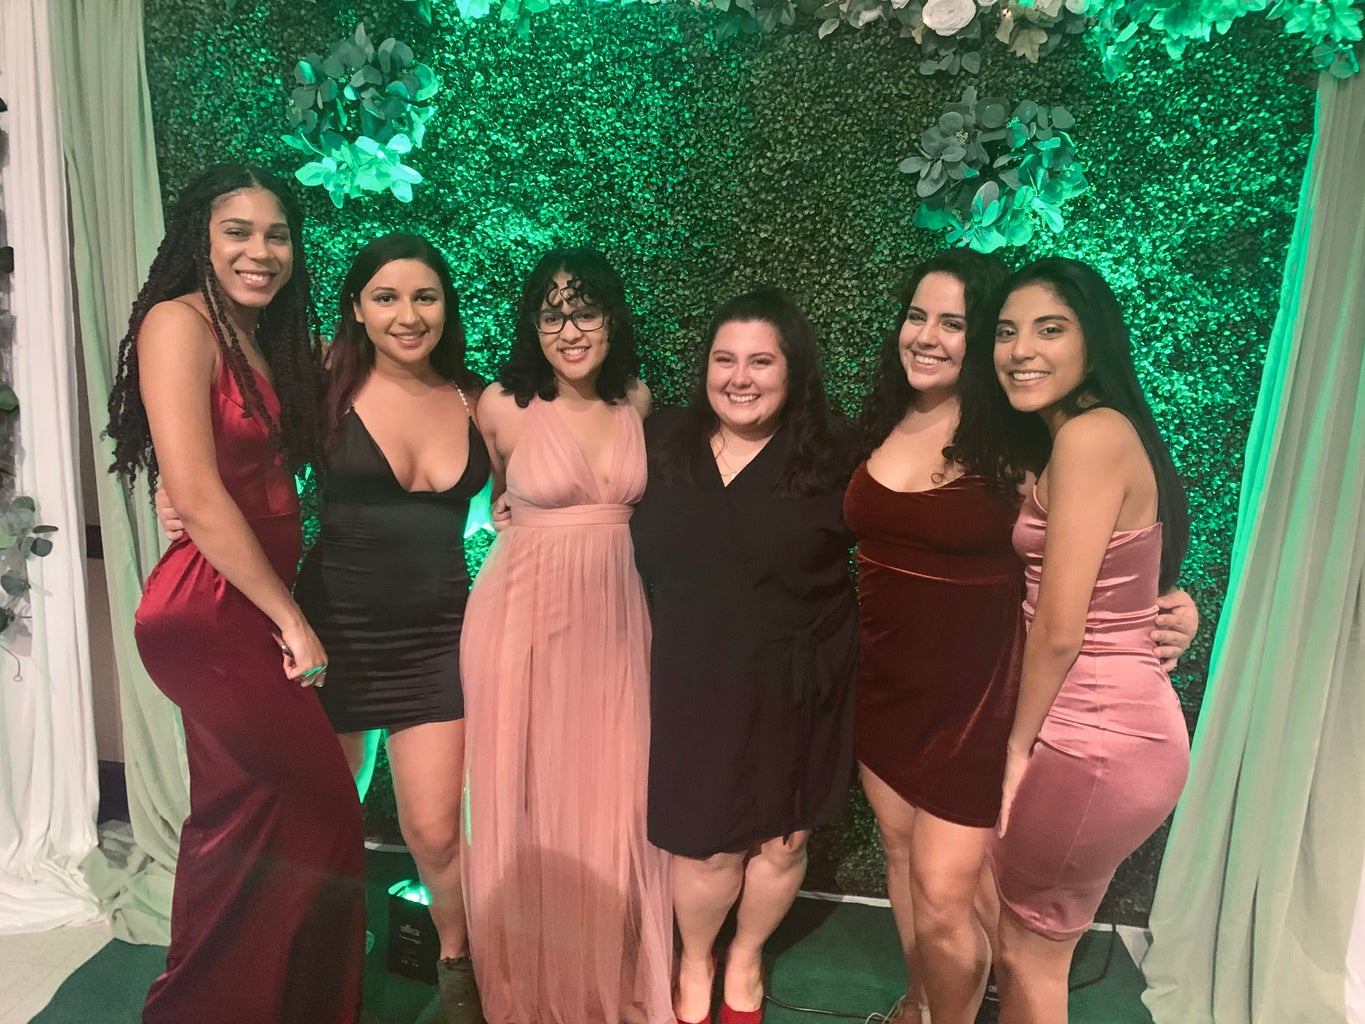 A group of women pose at a formal event in front of a green background.